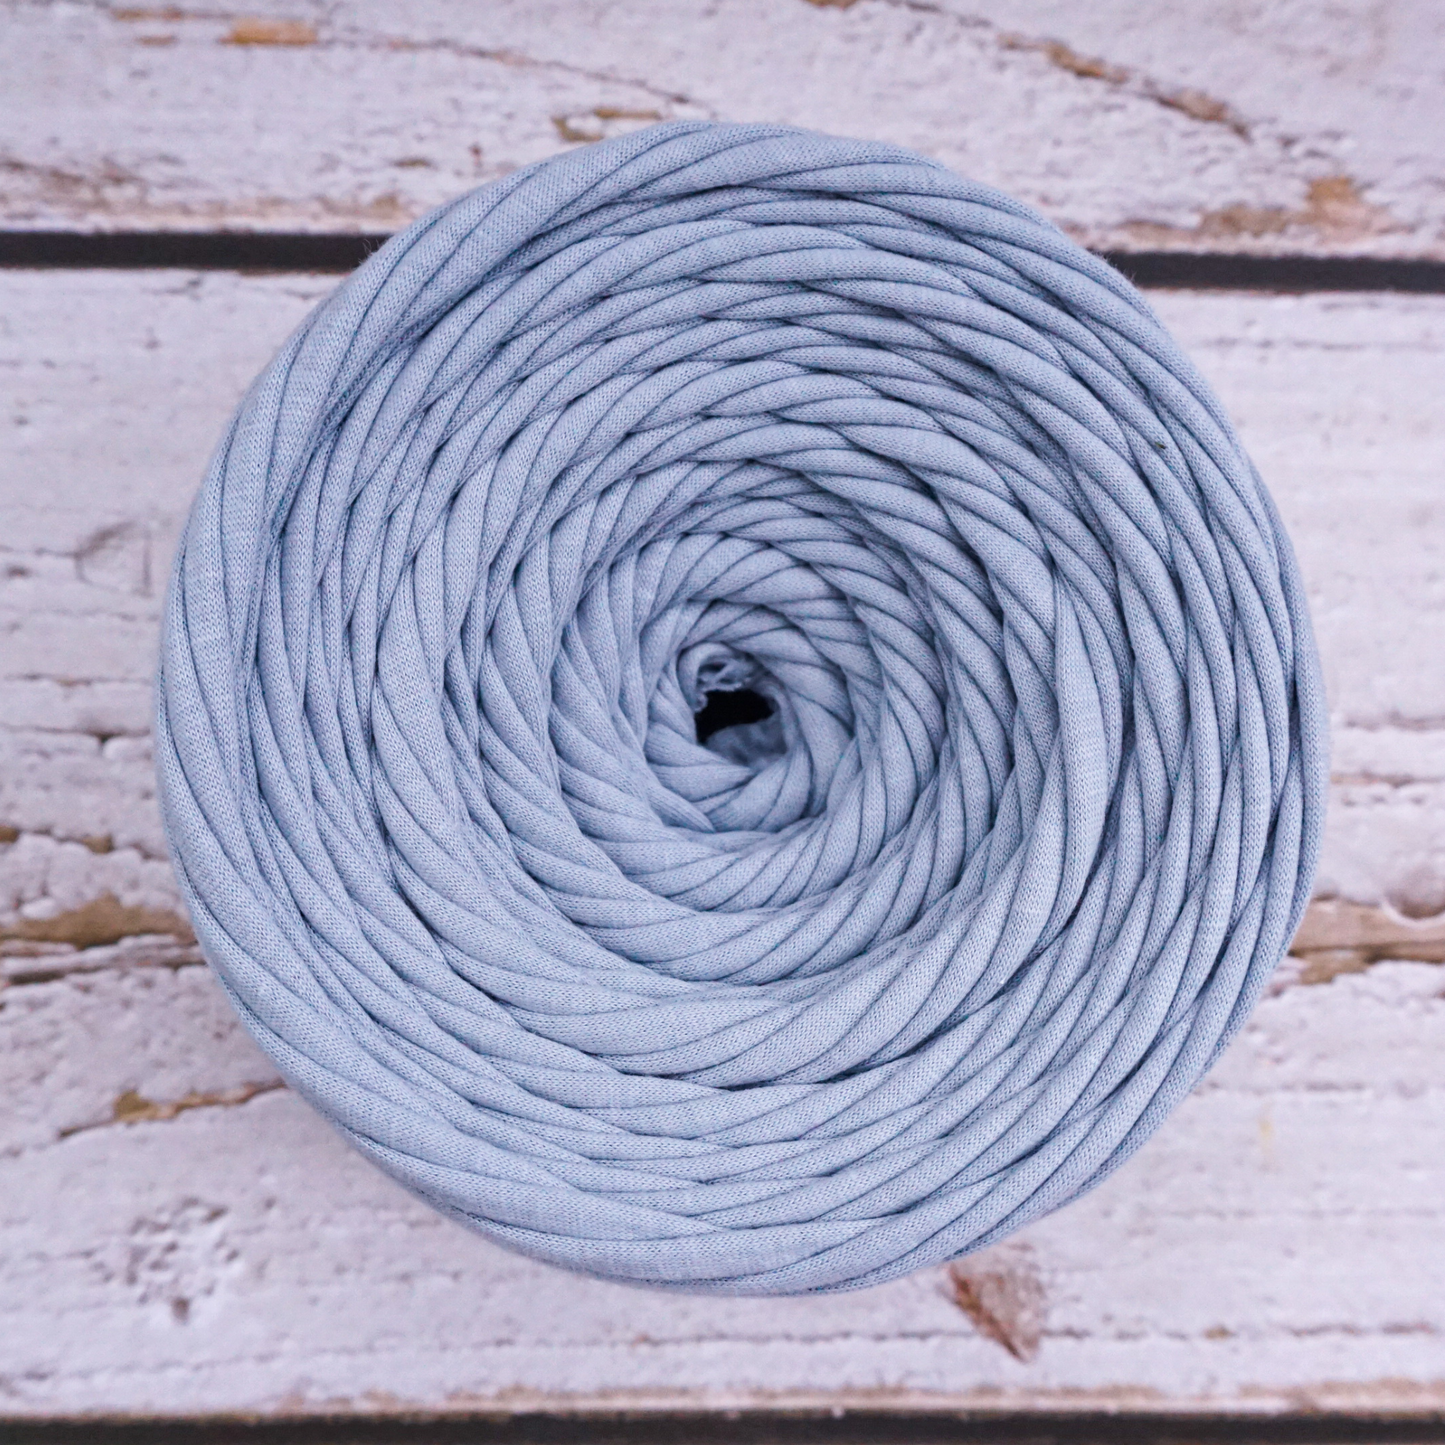 T-shirt yarn for crocheting baskets, bags, rugs and home decor.  Grey